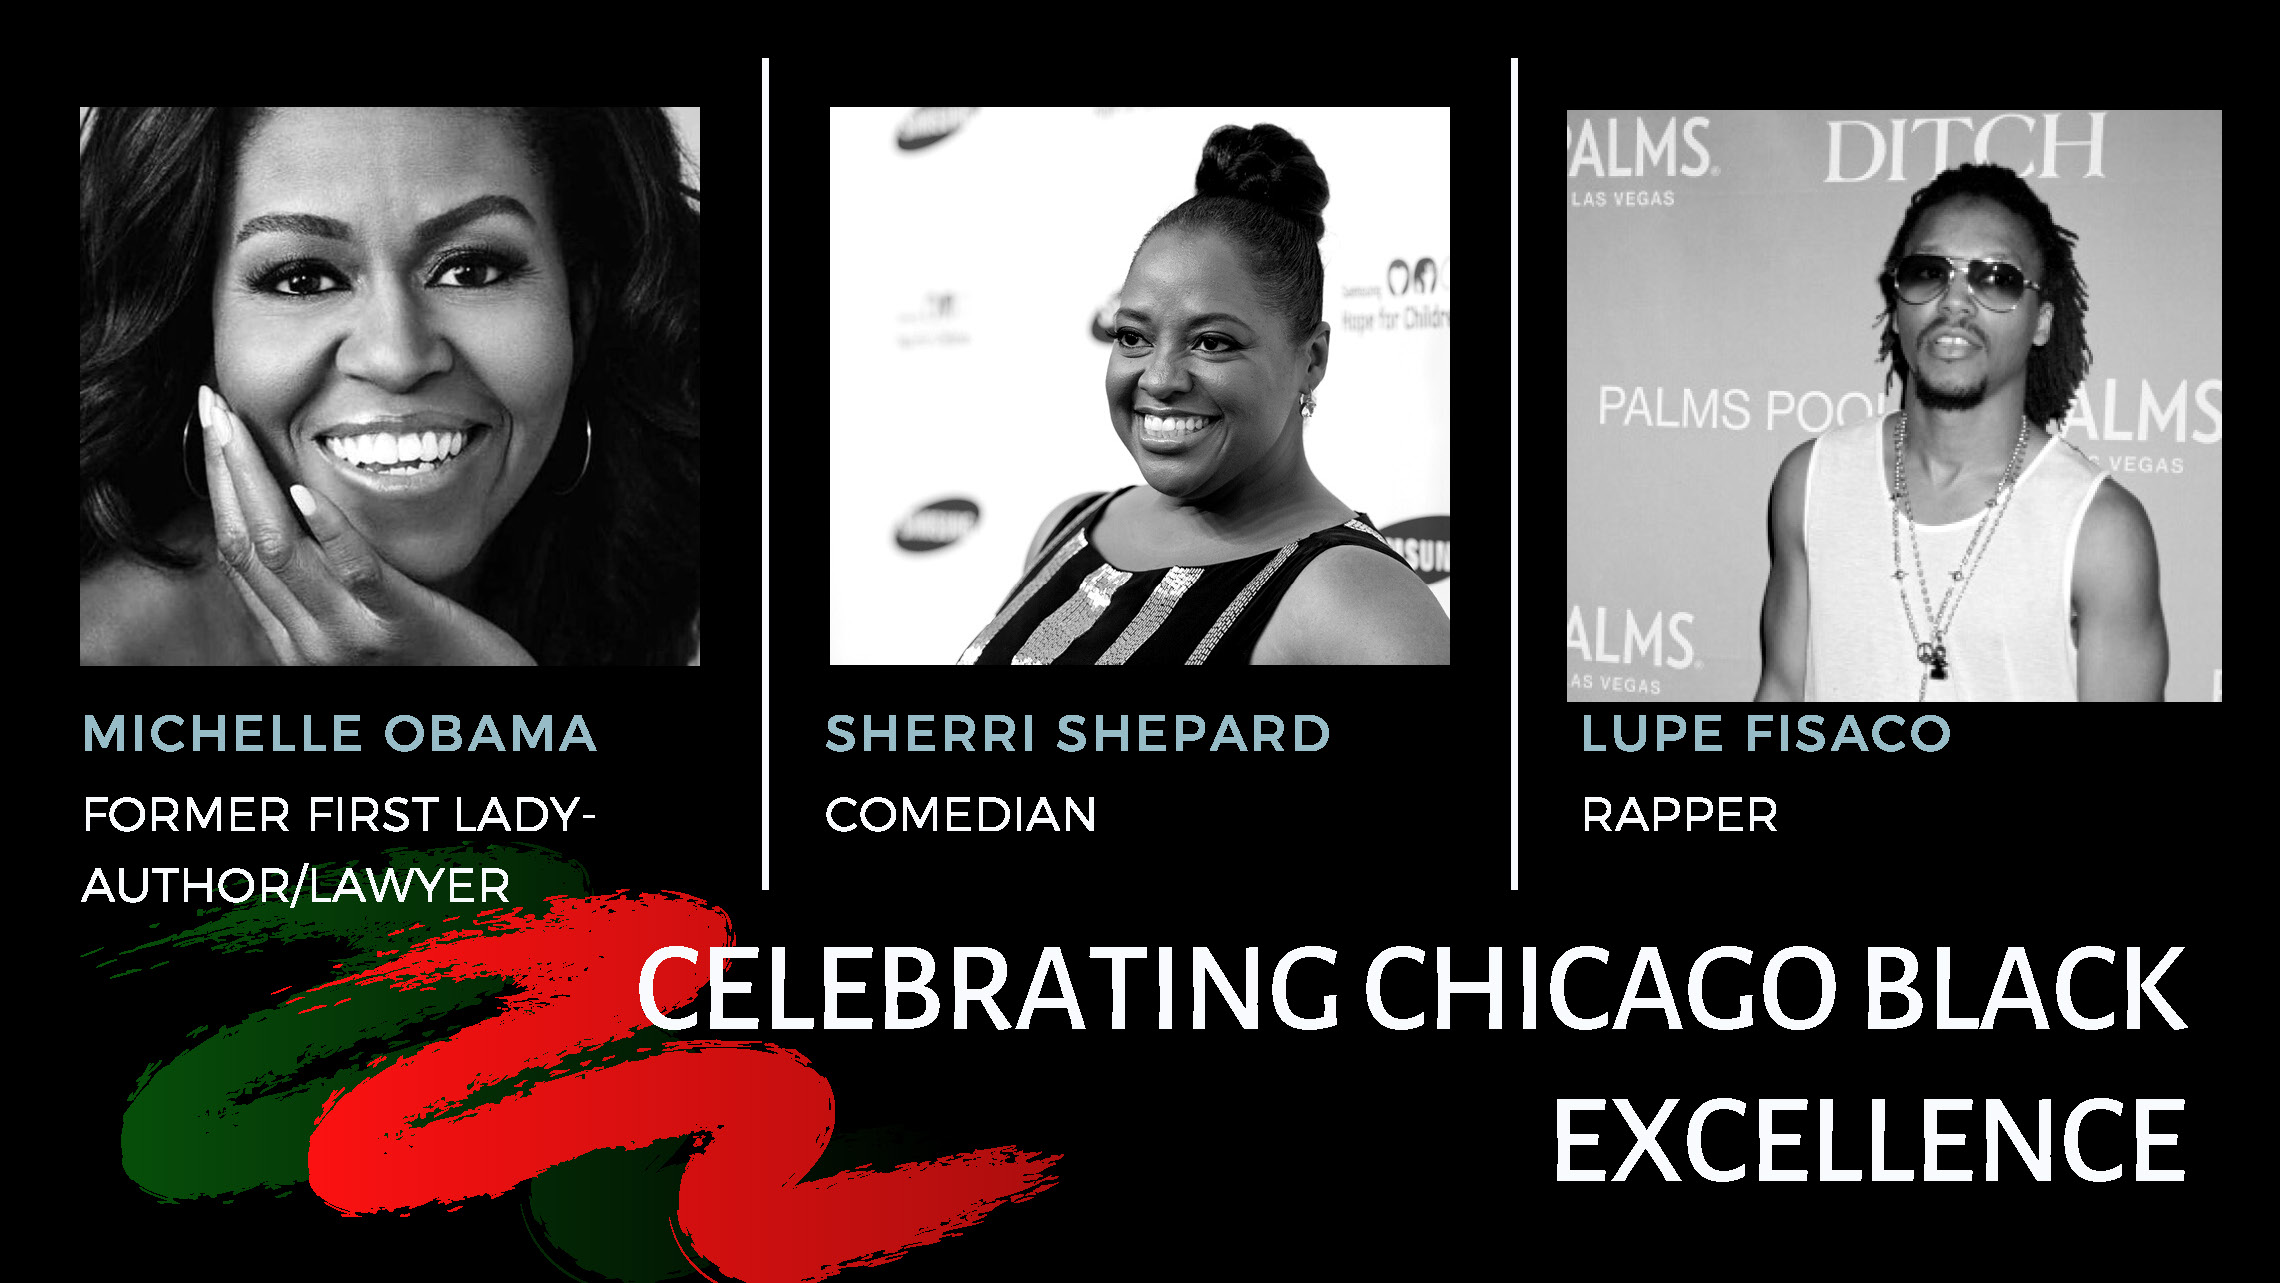 A Tribute to Chicago Black Excellence!